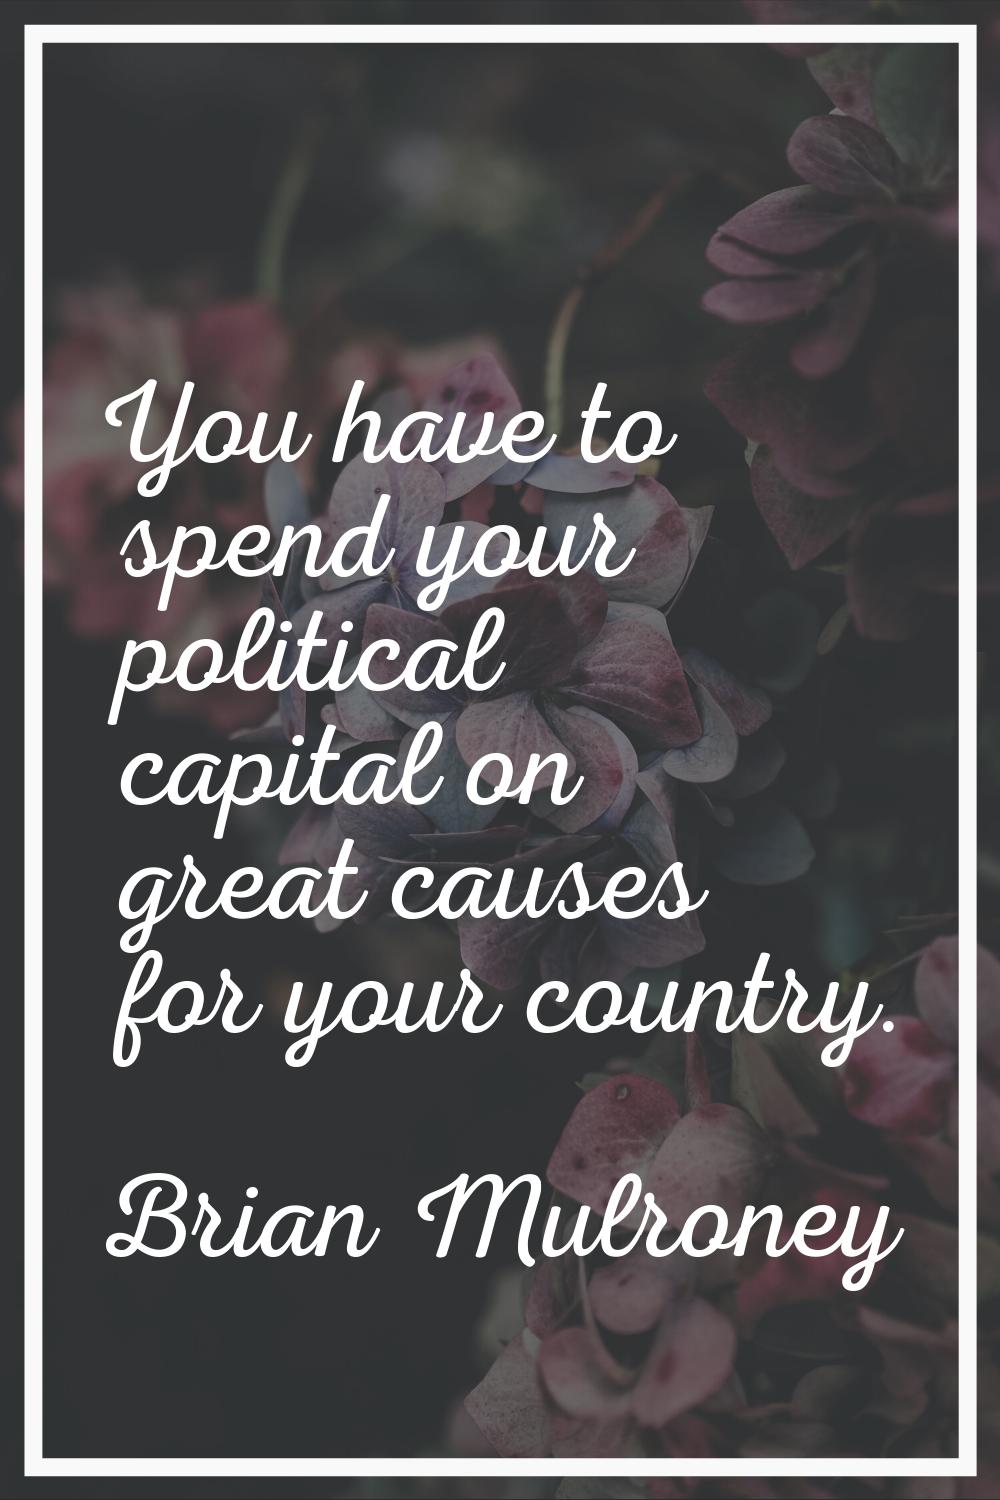 You have to spend your political capital on great causes for your country.